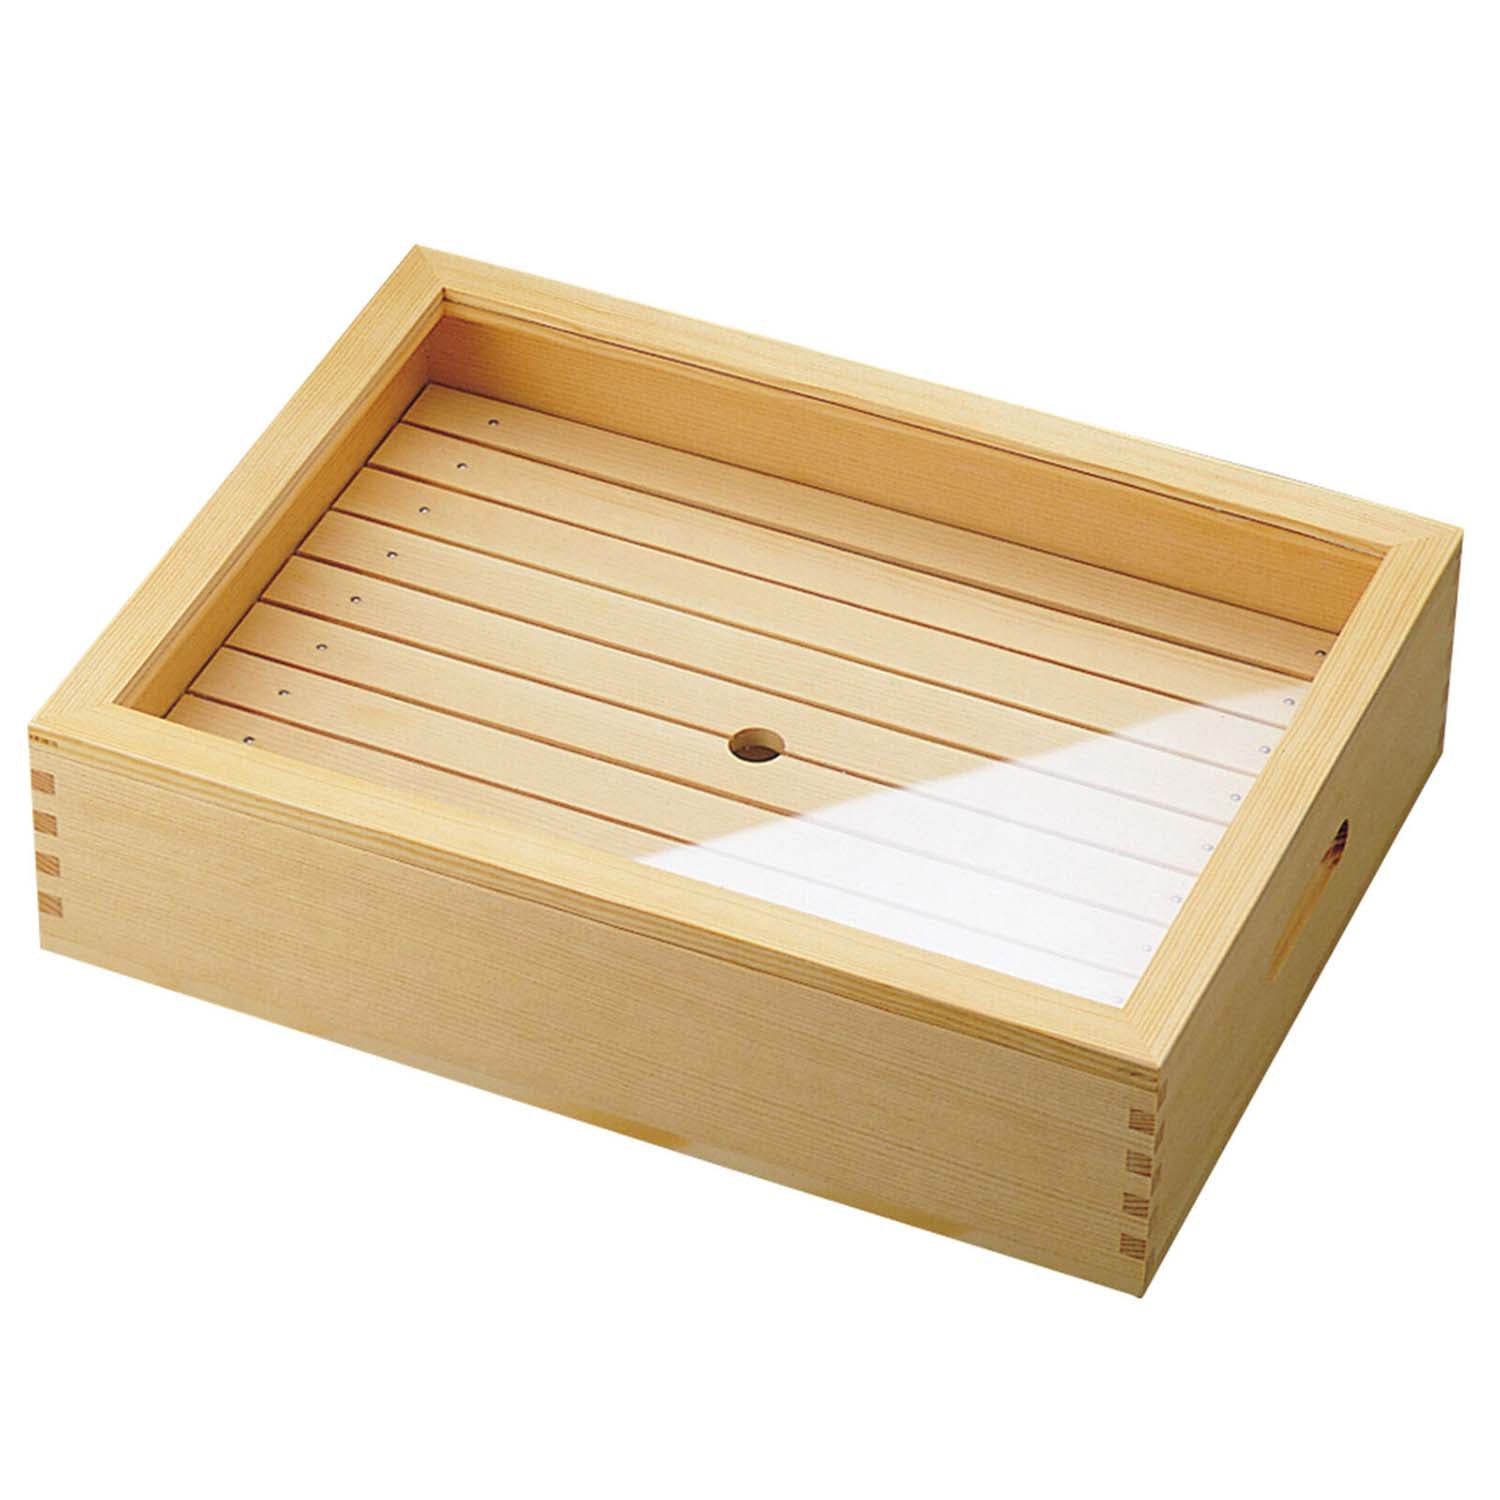 Yamacoh Wooden Sushi Neta Case with Stainlesss Steel Tray 